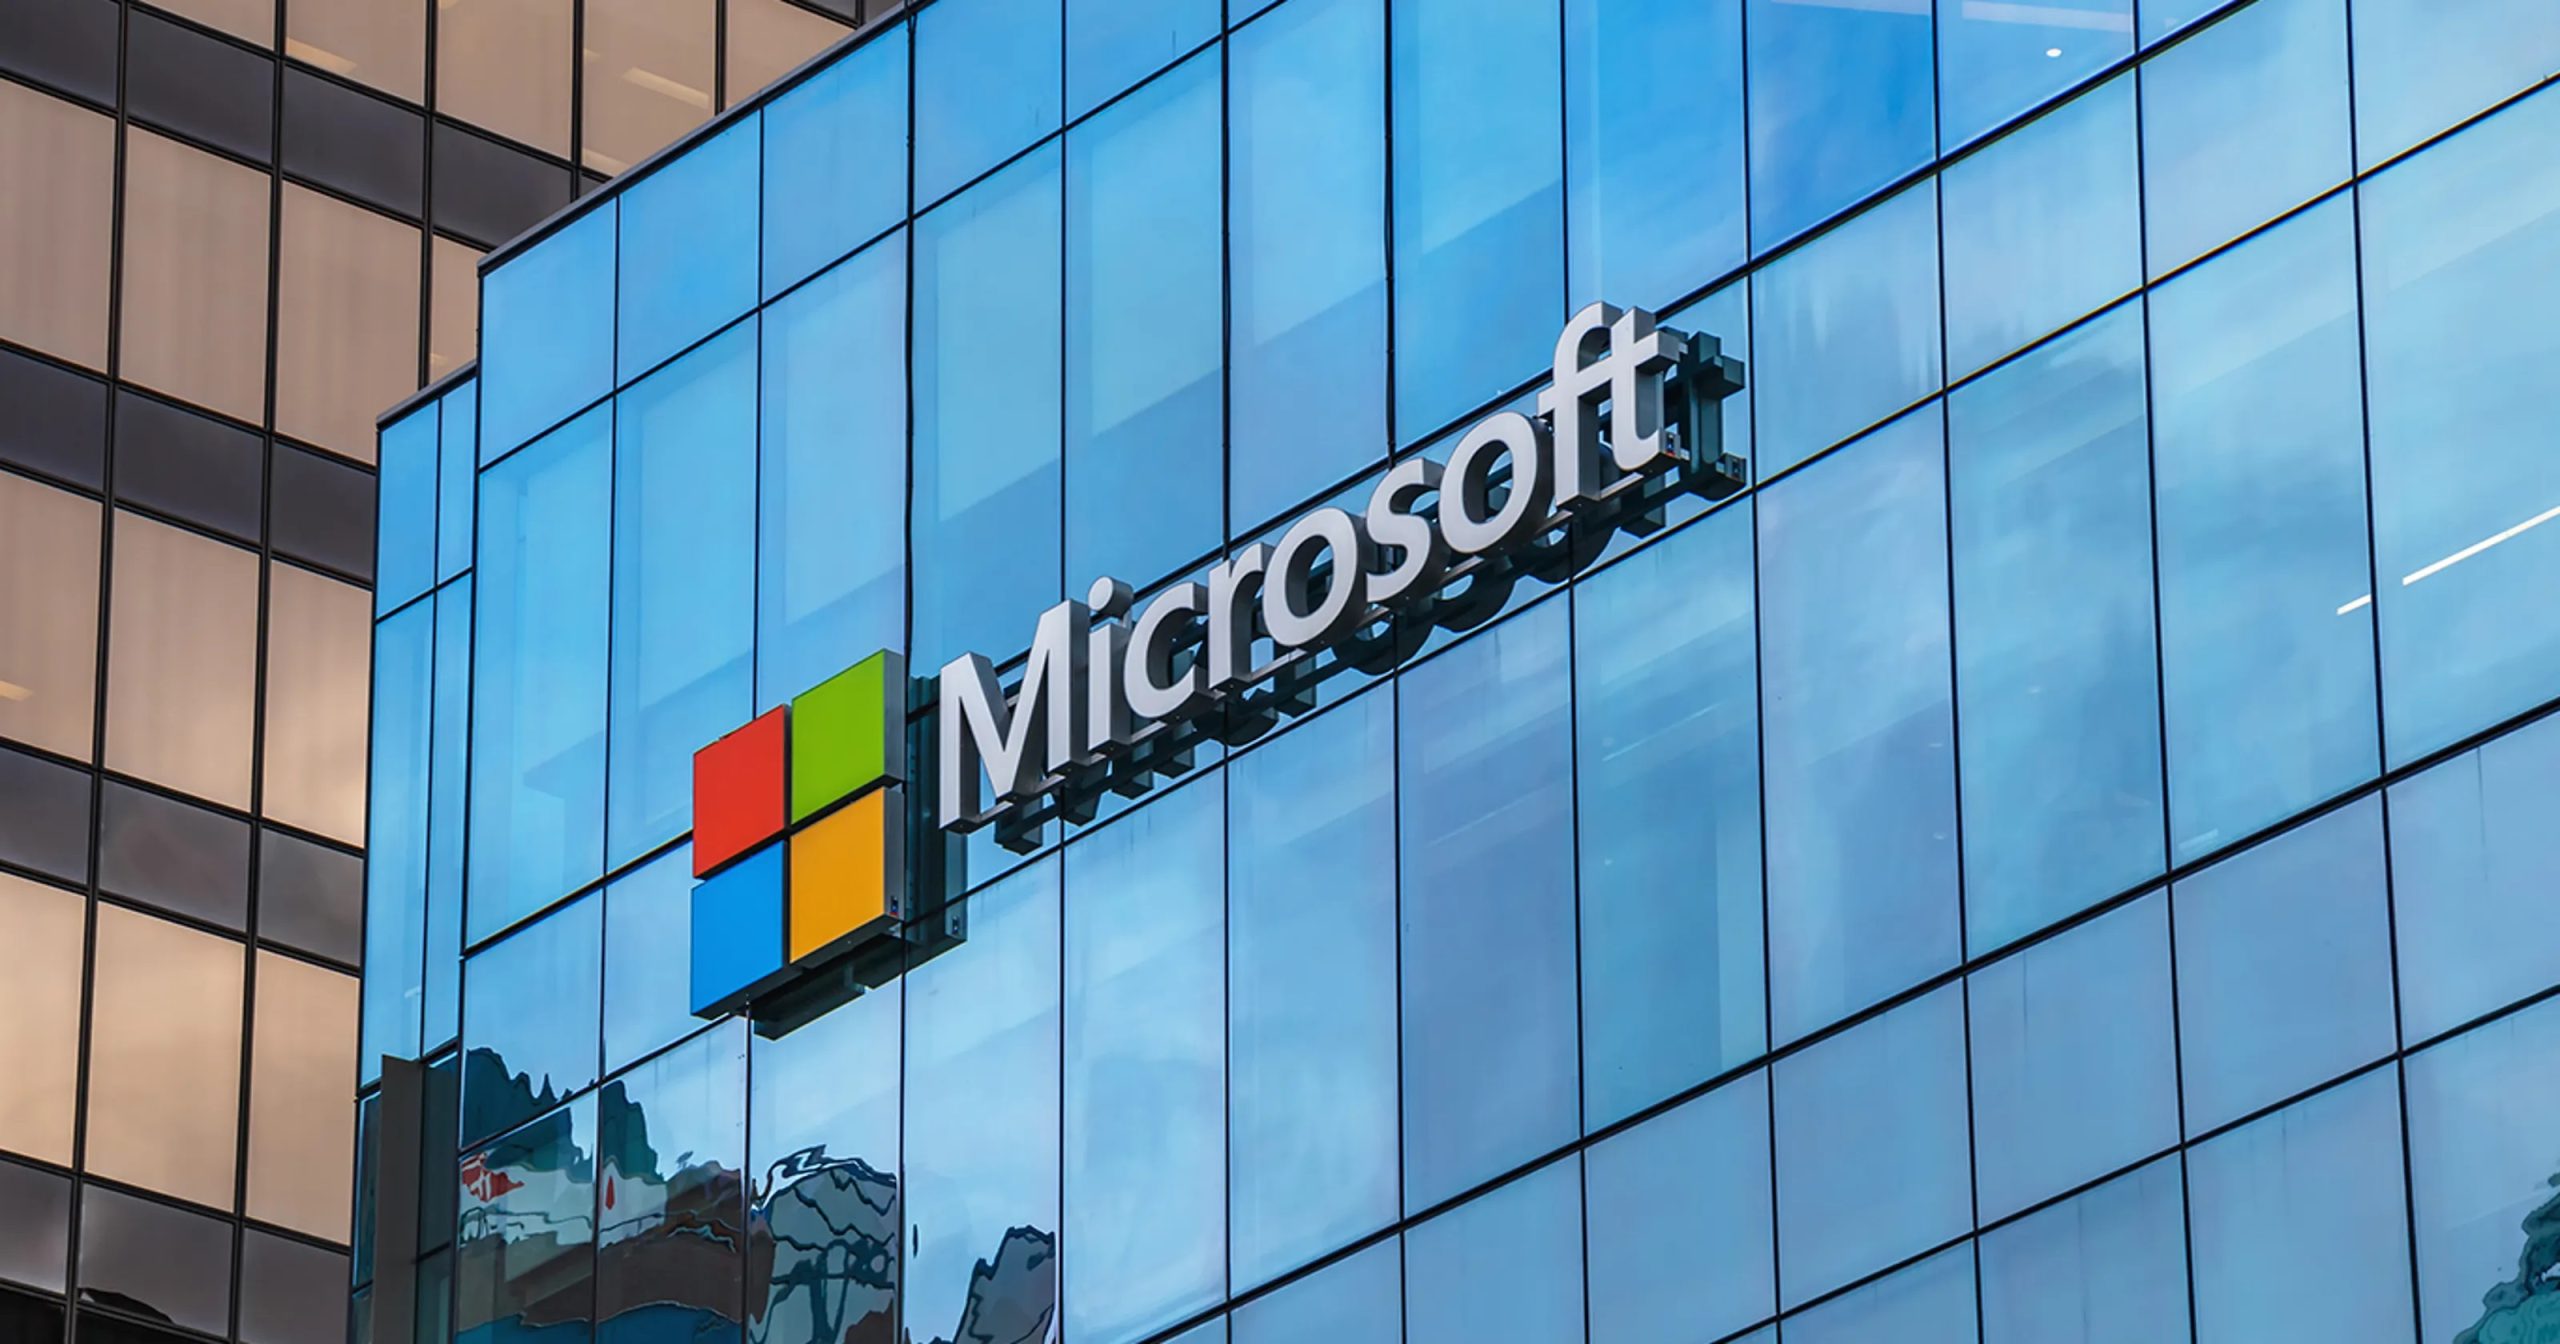 Microsoft Should Suspend Data Center Plans in Saudi Arabia: Balancing Corporate Growth with Human Rights Considerations